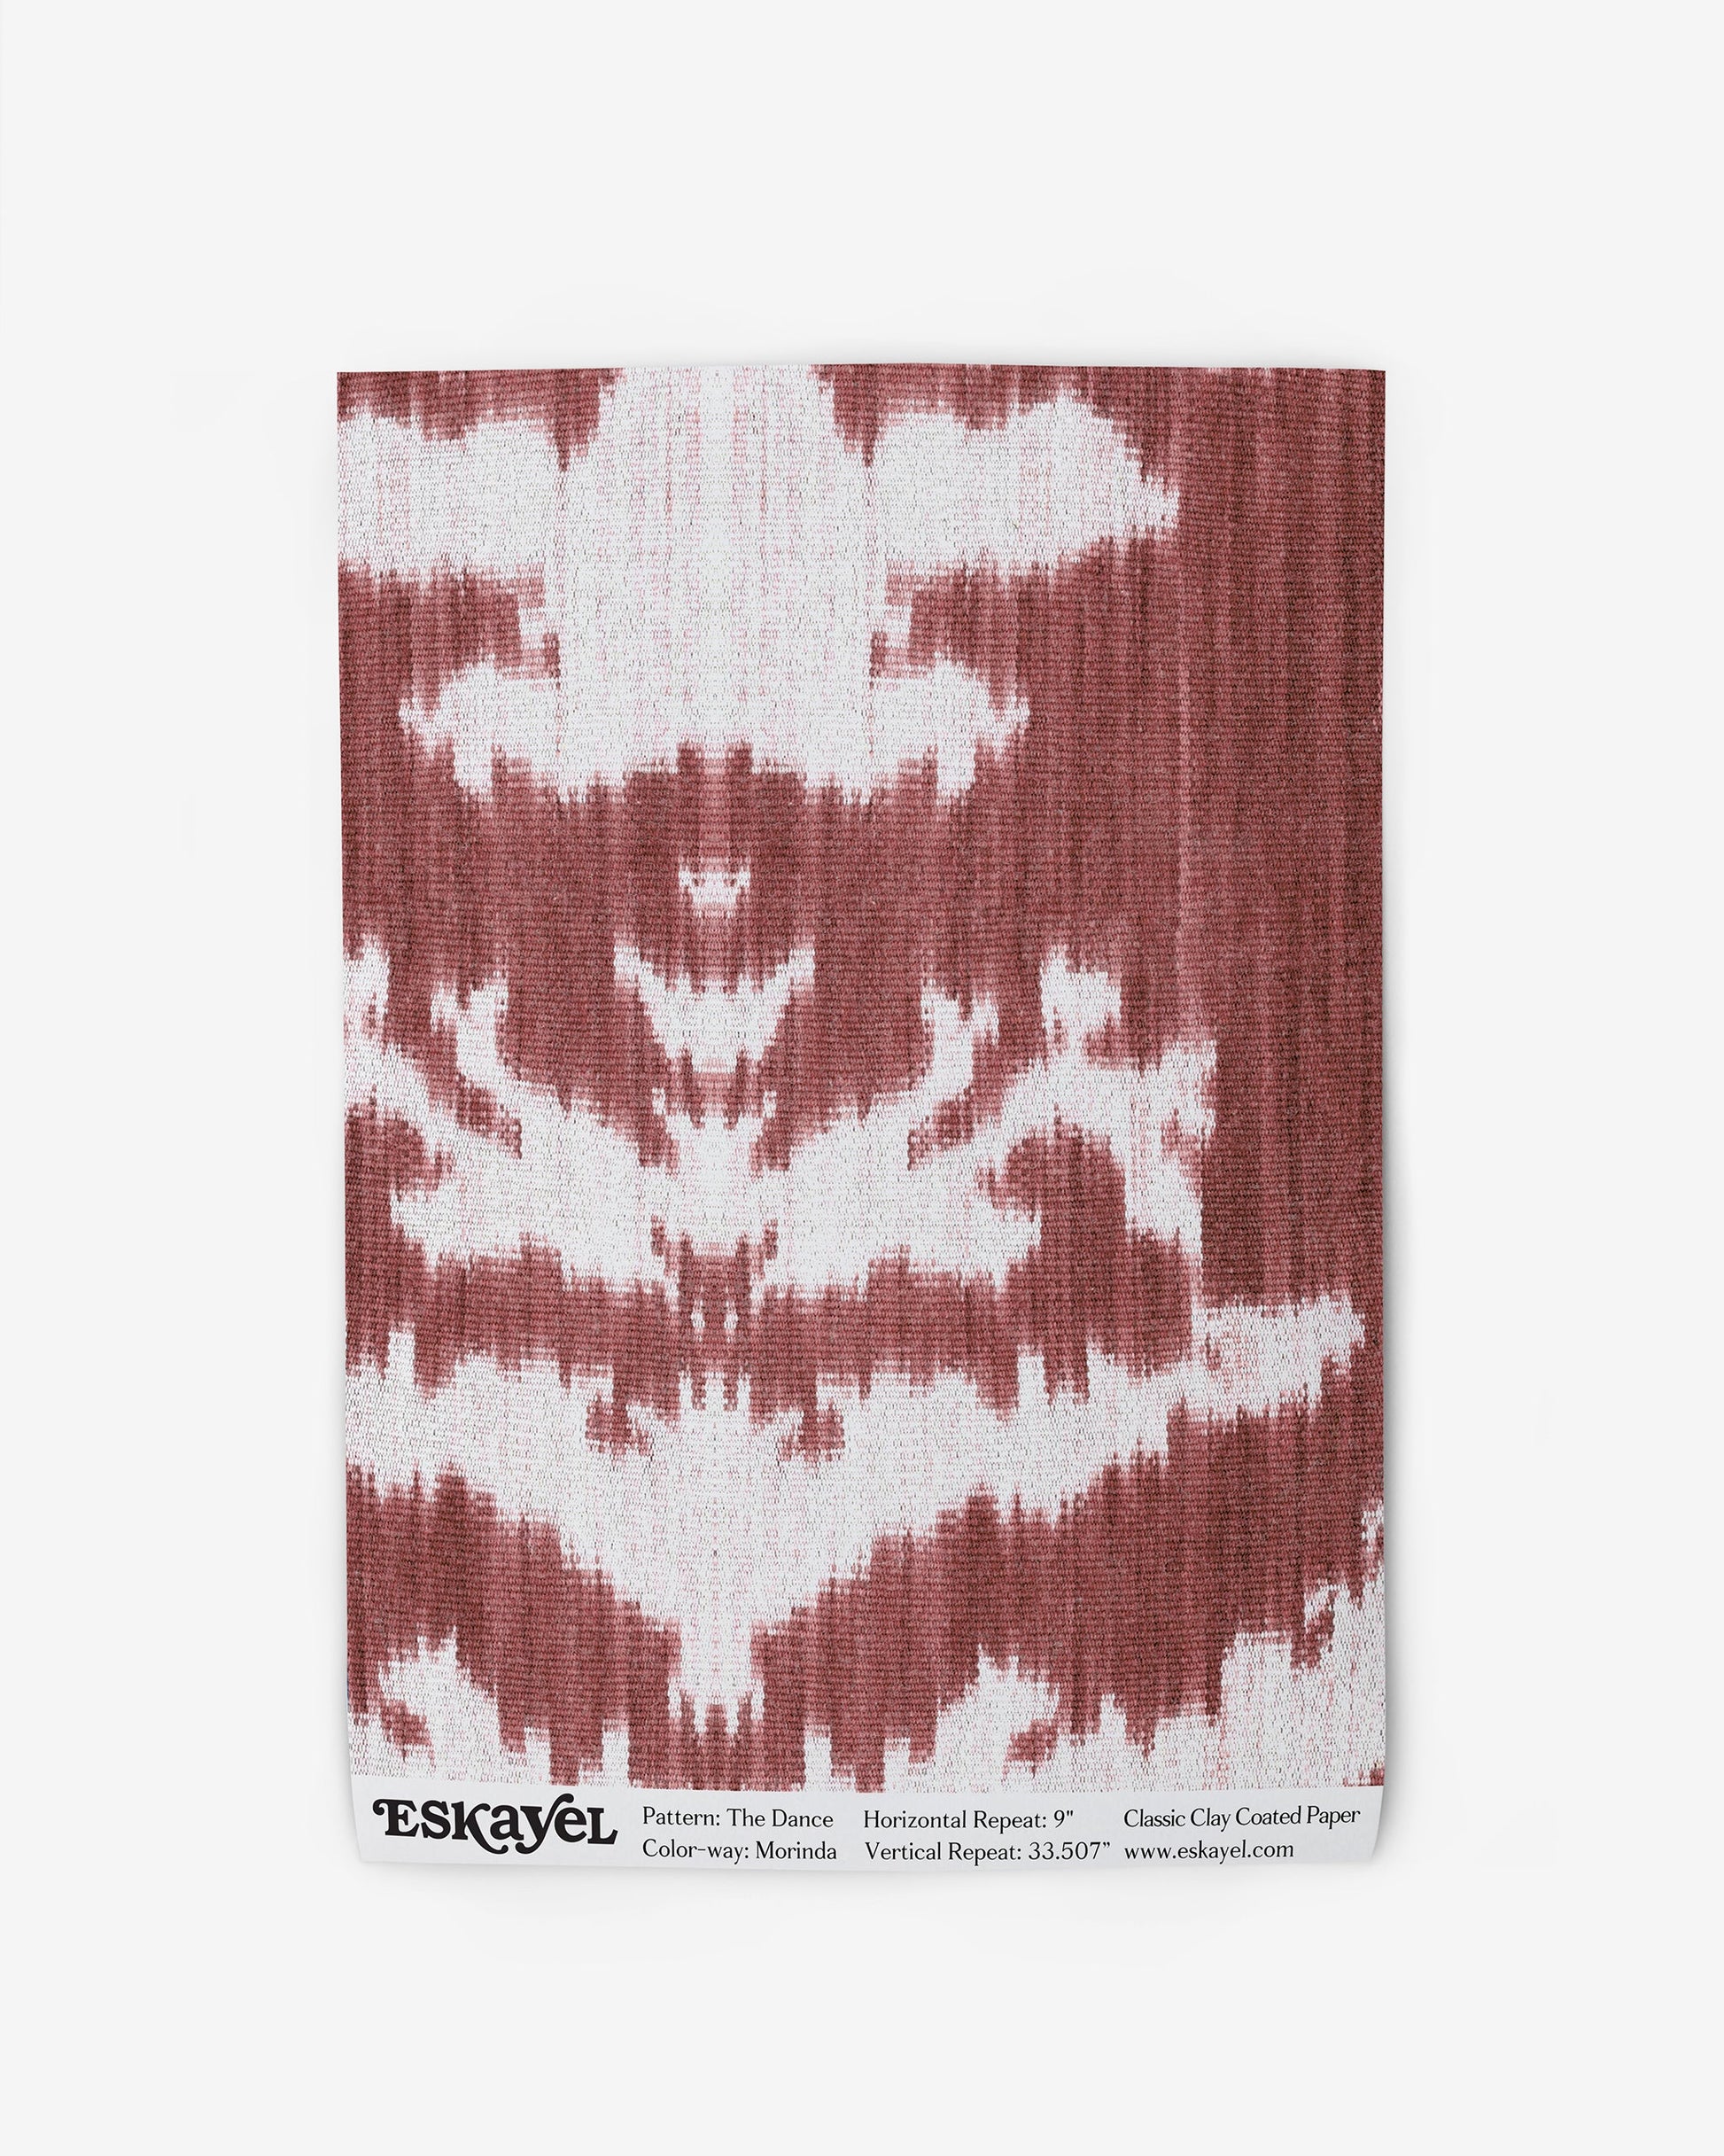 A red and white The Dance Wallpaper Morinda Ikat print on wallpaper